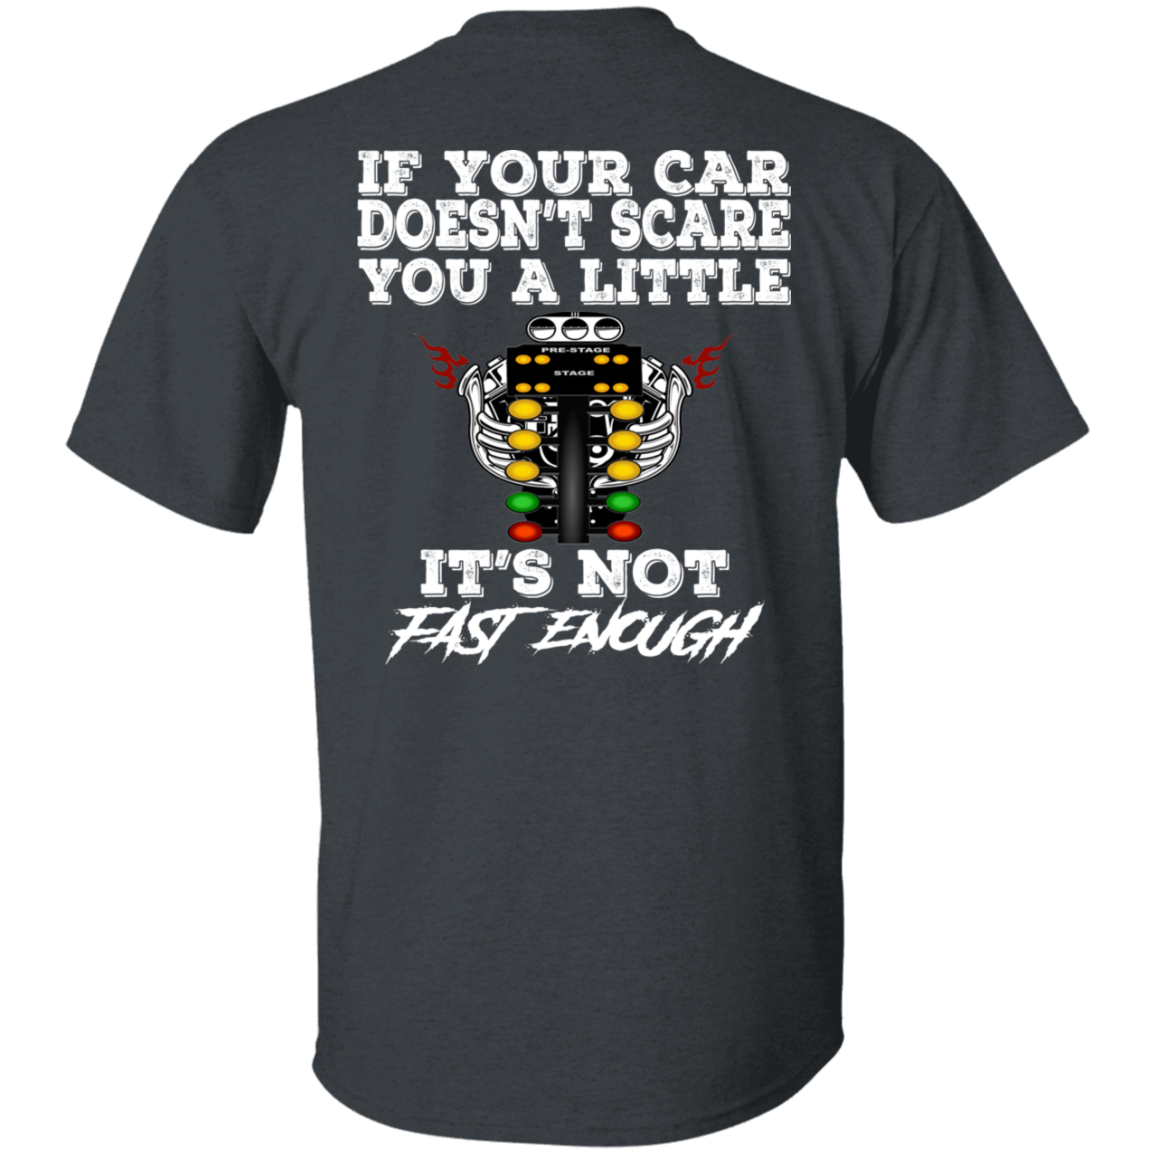 If Your Car Doesn't Scare You It's Not Fast Enough Drag Racing 5.3 oz. T-Shirt